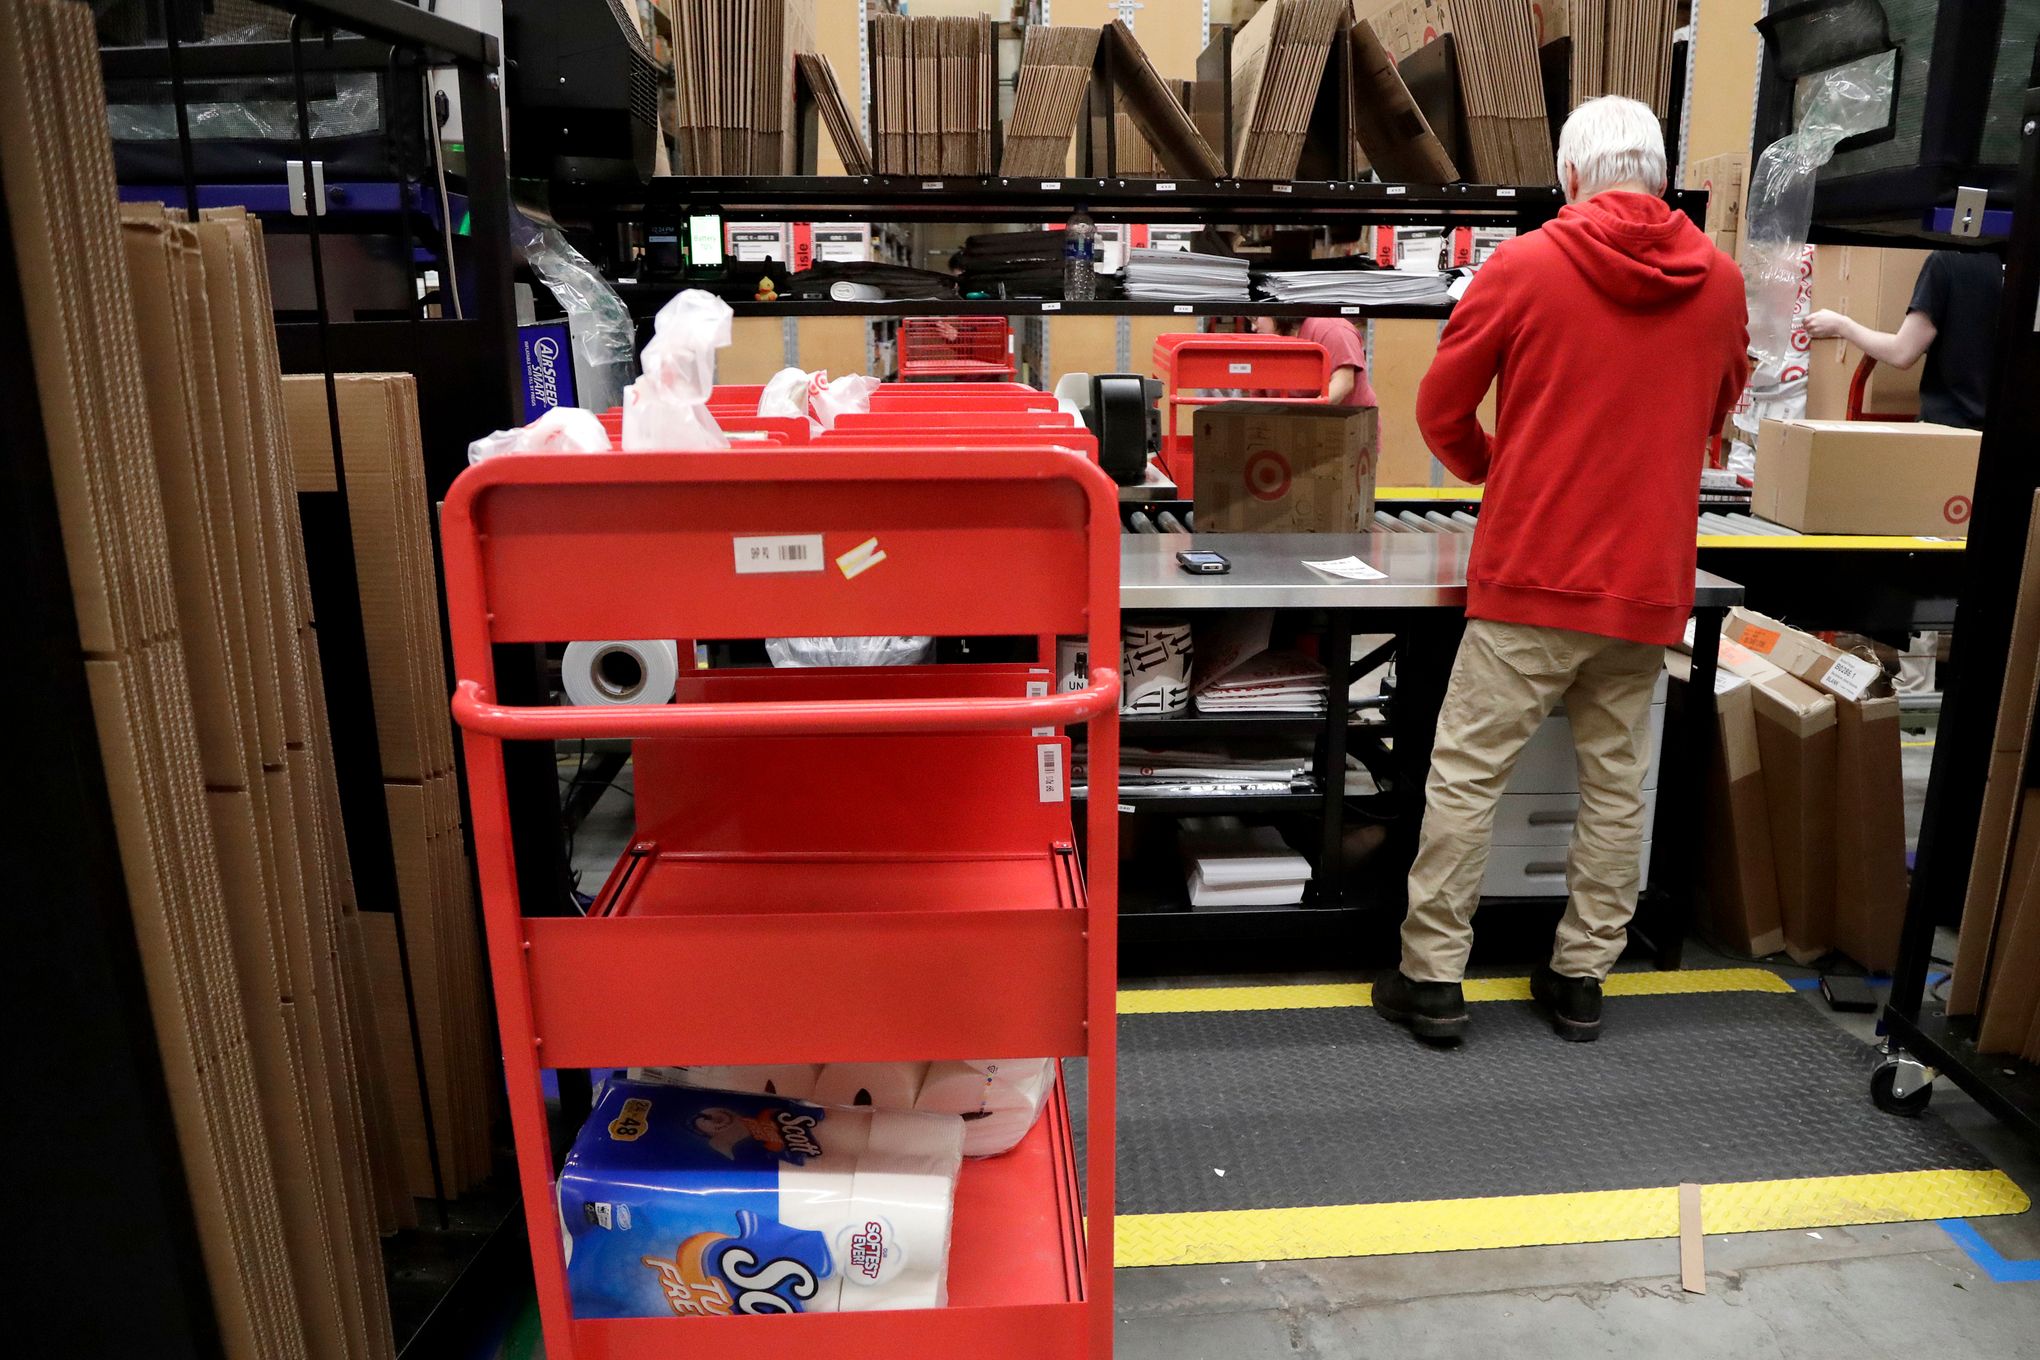 Target is using its stores for same-day delivery and online order